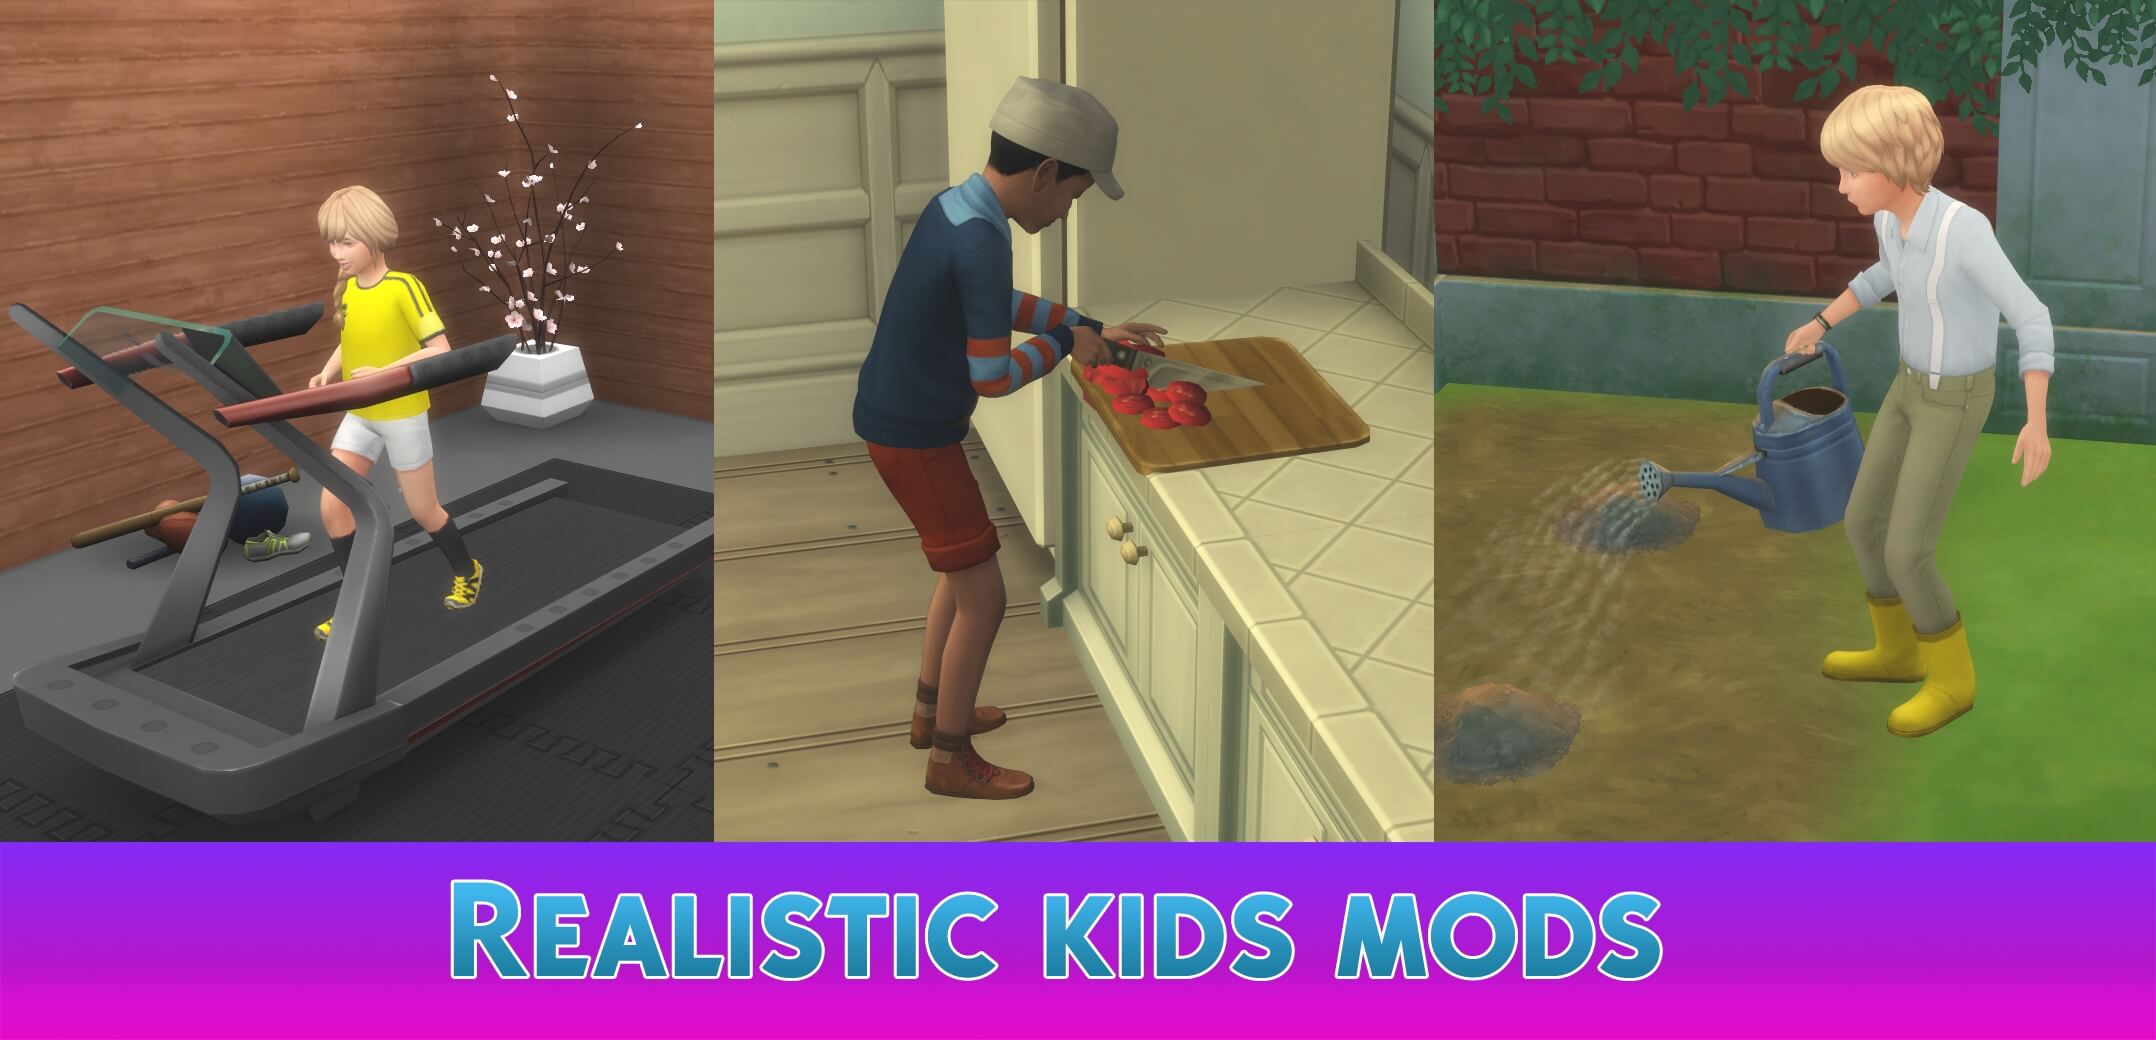 Sims 4 Realistic Kids Mods Best Sims Mods